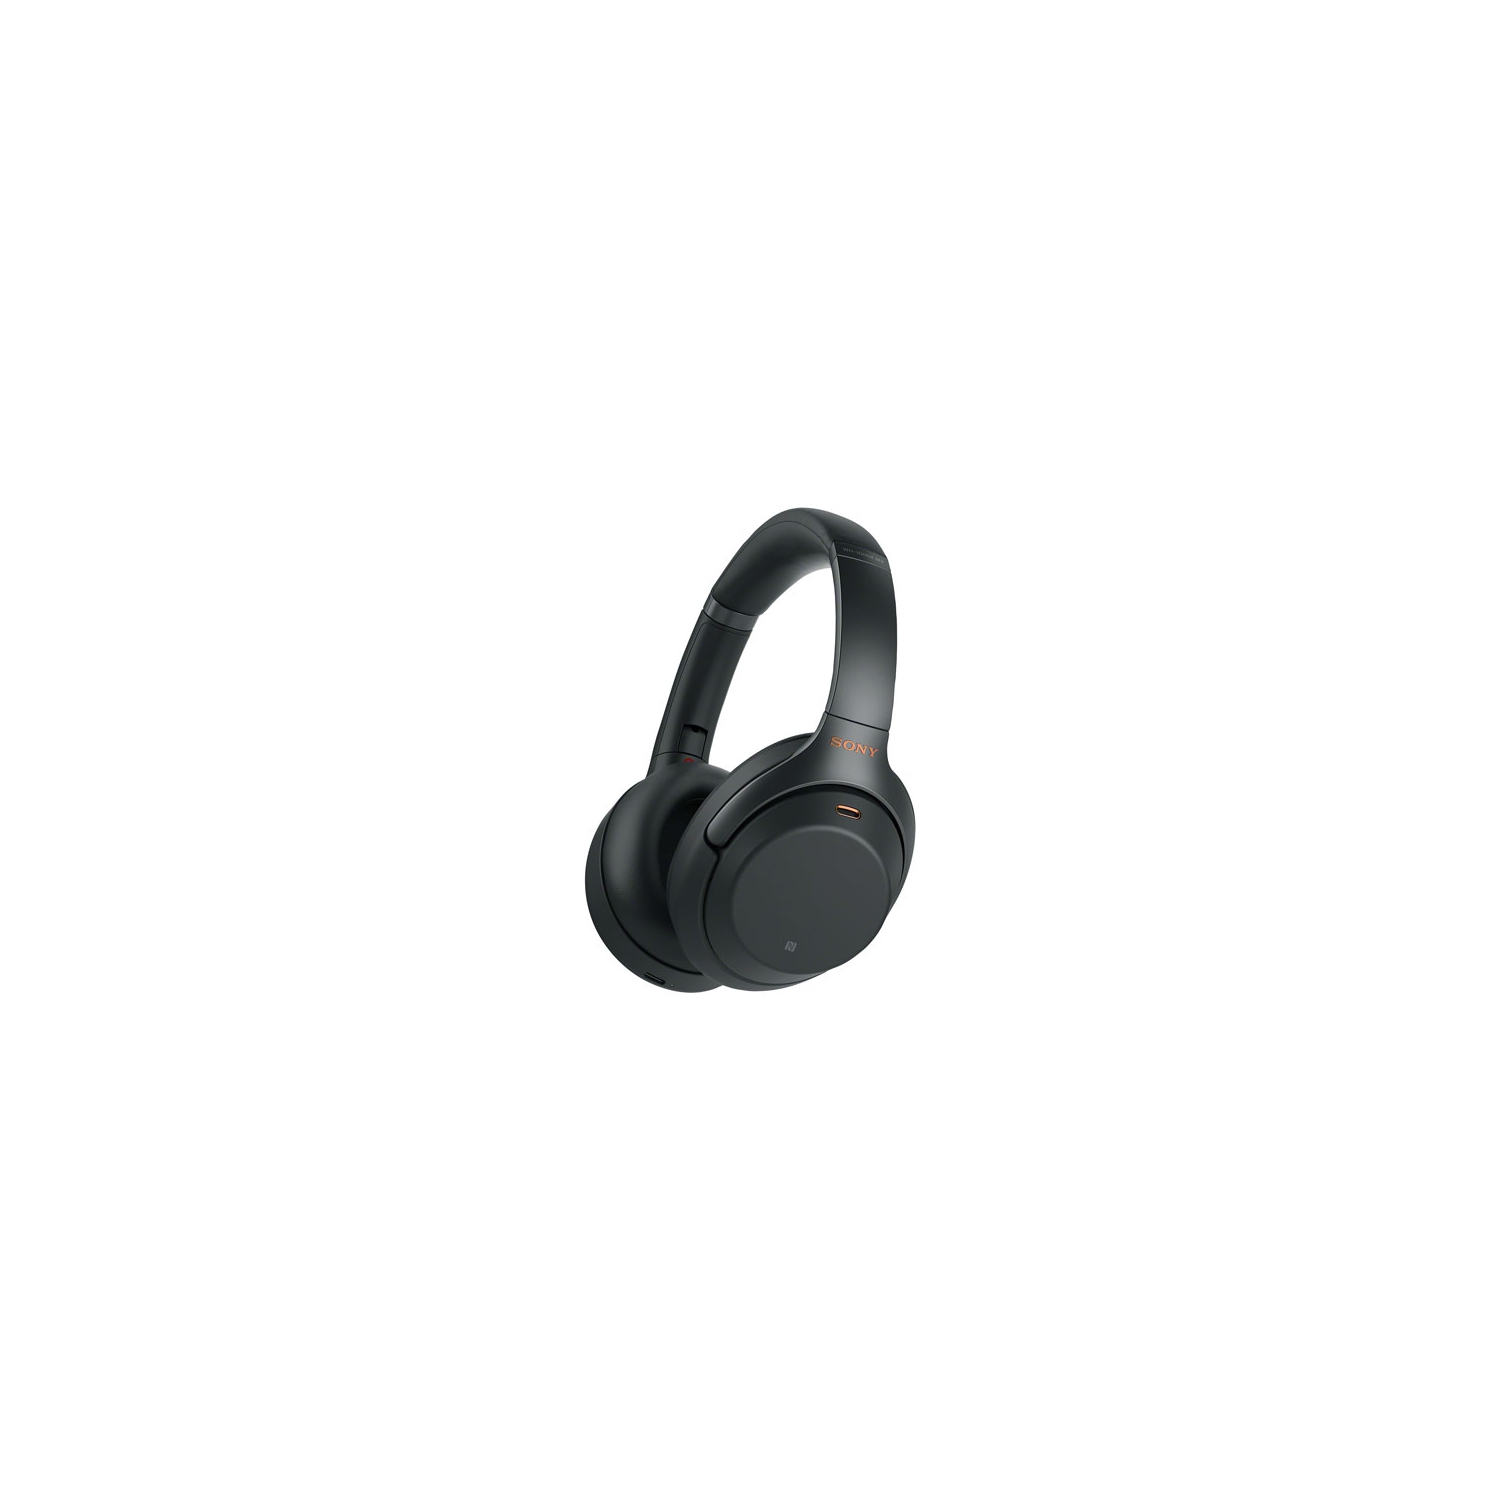 Sony Over-Ear Noise Cancelling Headphones (WH1000XM3/B) - Black - Open Box (10/10 condition)